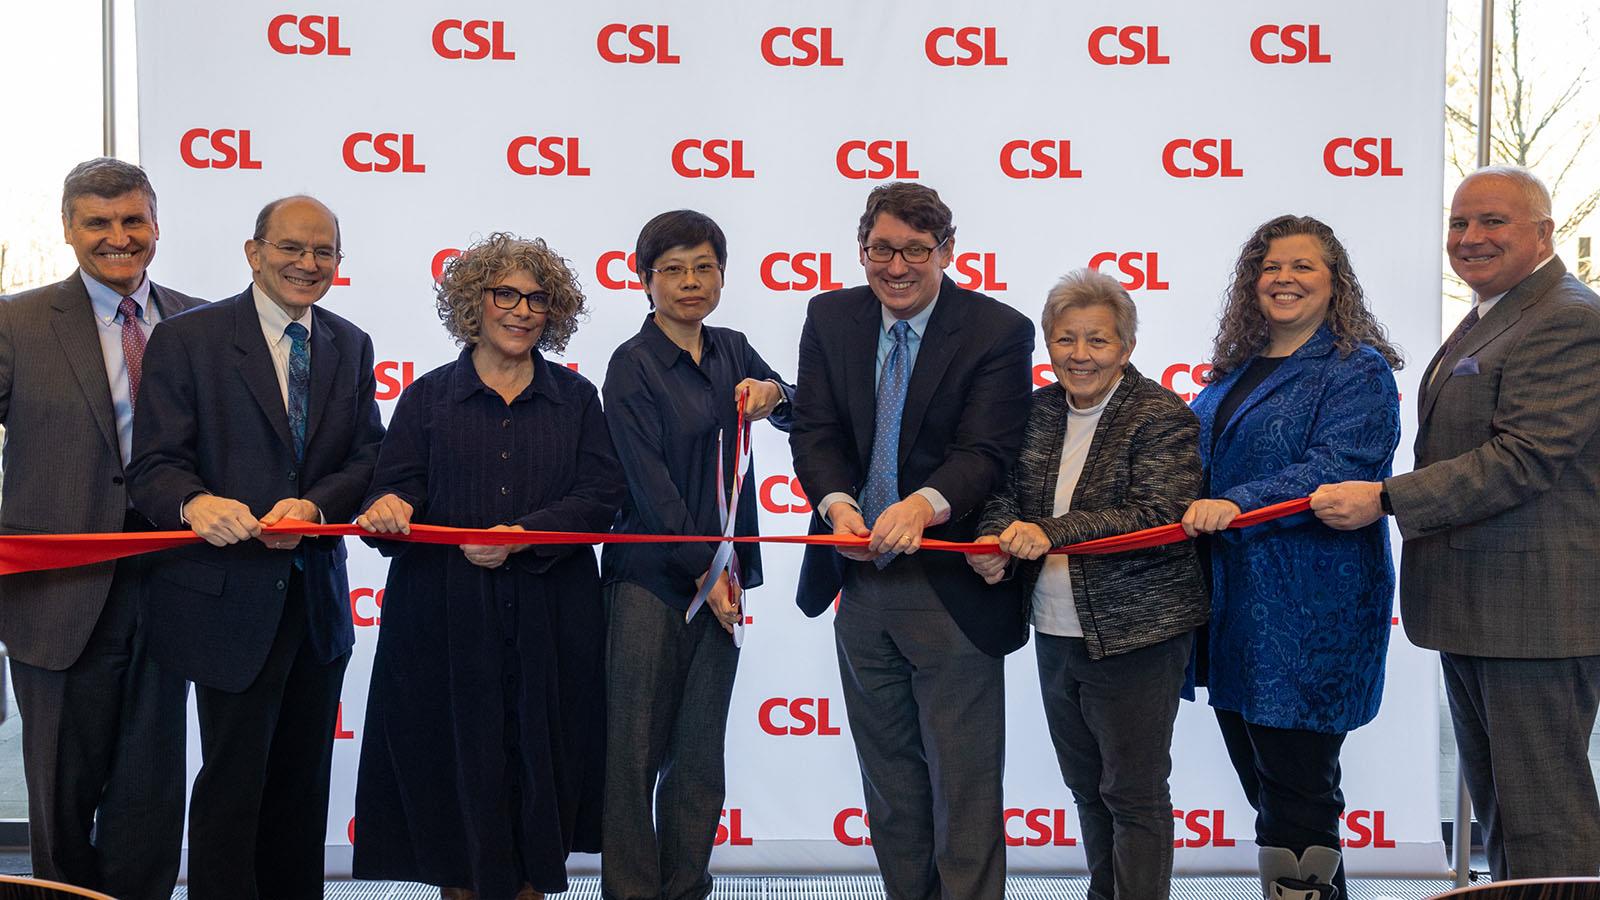 Ribbon cutting ceremony at CSL's R&D facility in Waltham.